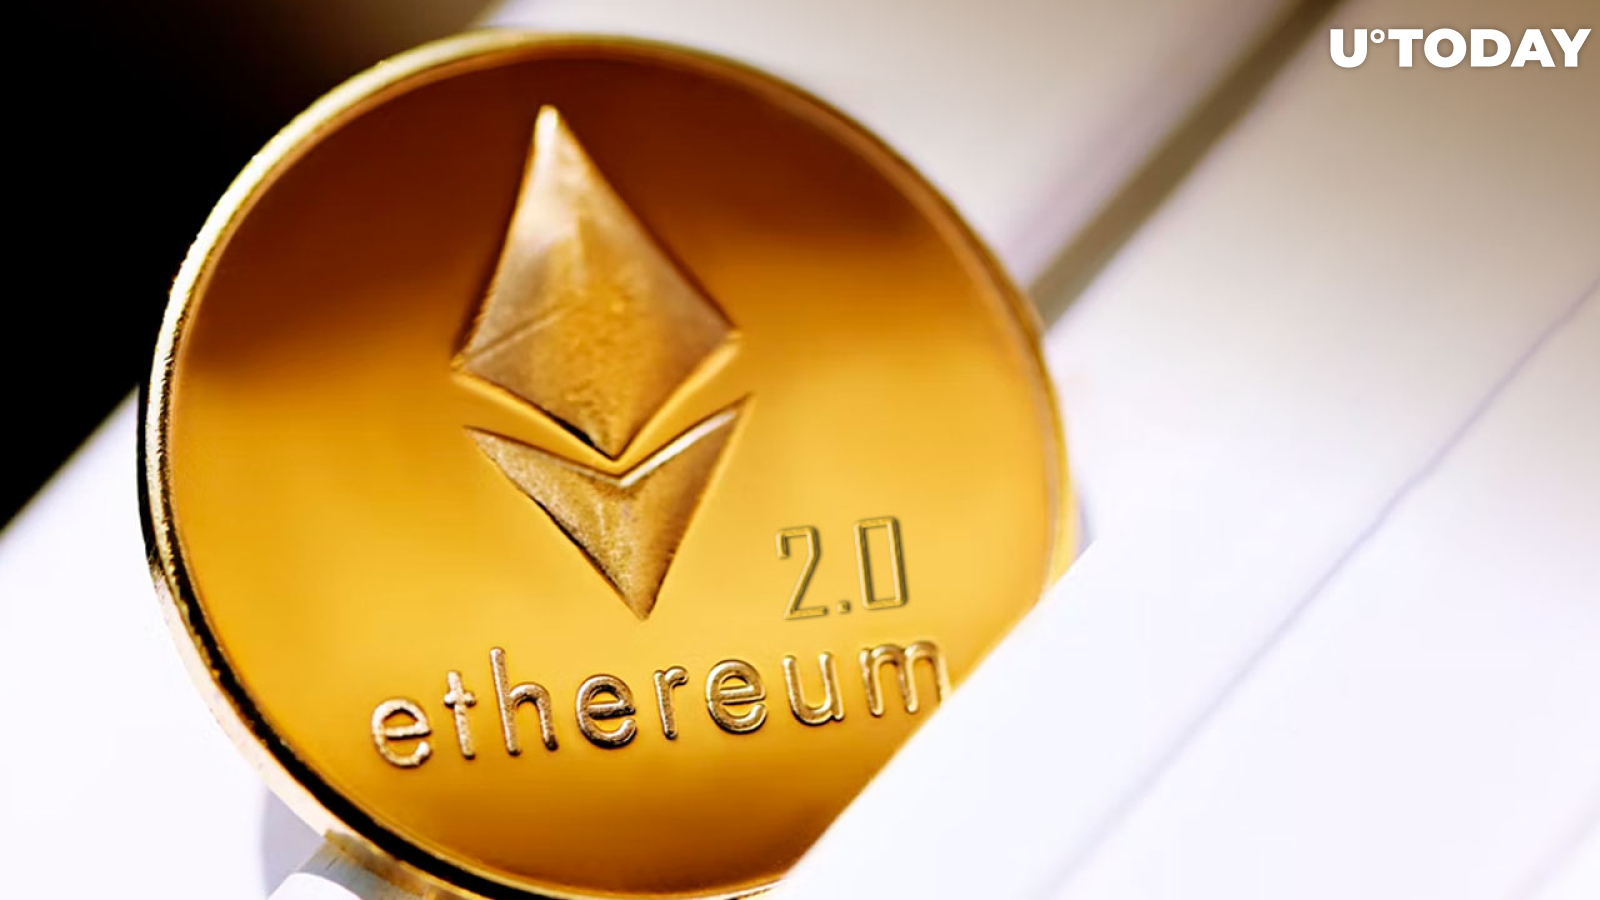 ETH 2.0 Deposit Contract Reaches New Milestone Ahead of Much-Anticipated Merge Event